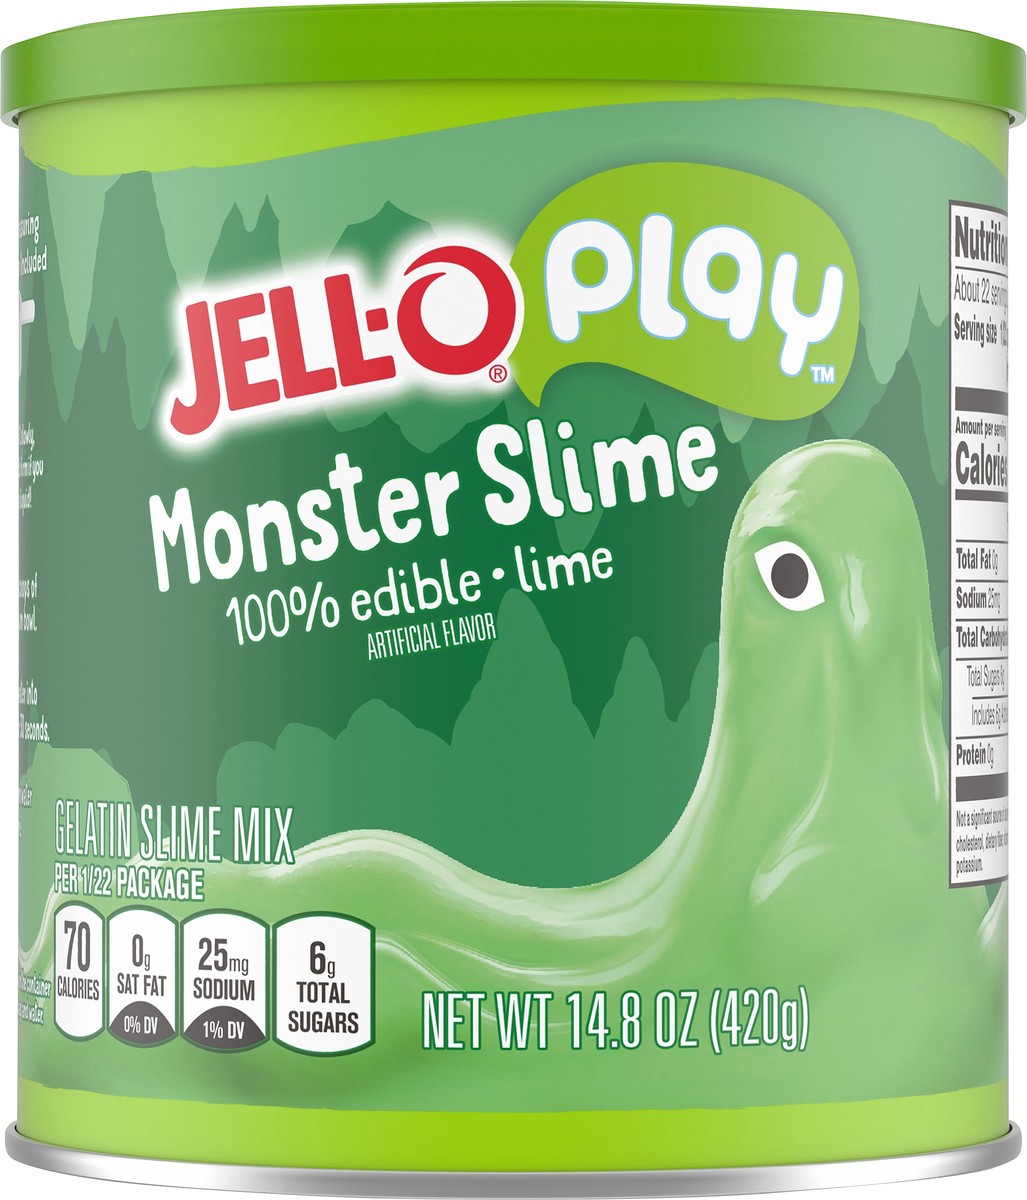 slide 9 of 14, Jell-O Play Monster Slime Kit with 100% Edible Lime Gelatin Mix, 14.8 oz Canister, 14.8 oz